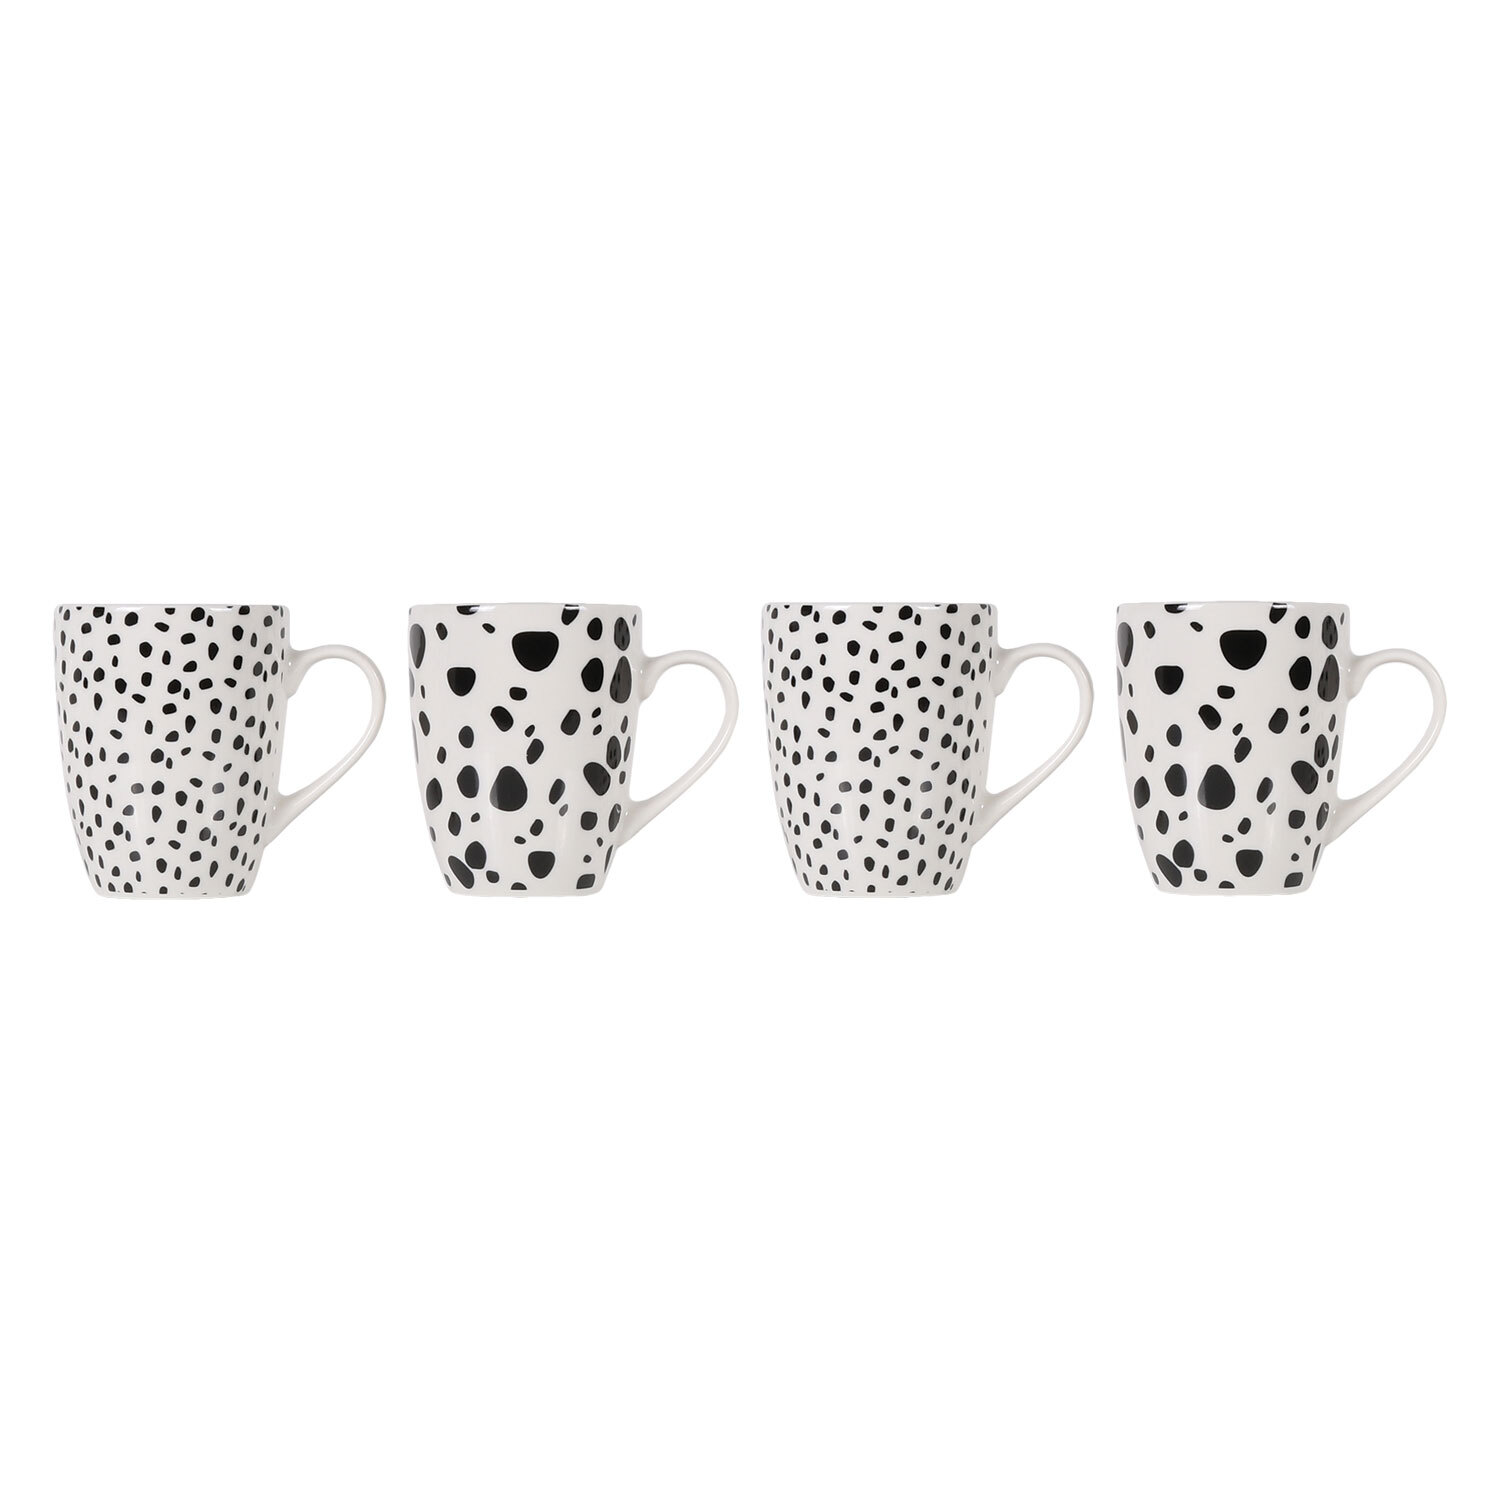 Single Monochrome Bullet Mugs 4 Pack in Assorted styles Image